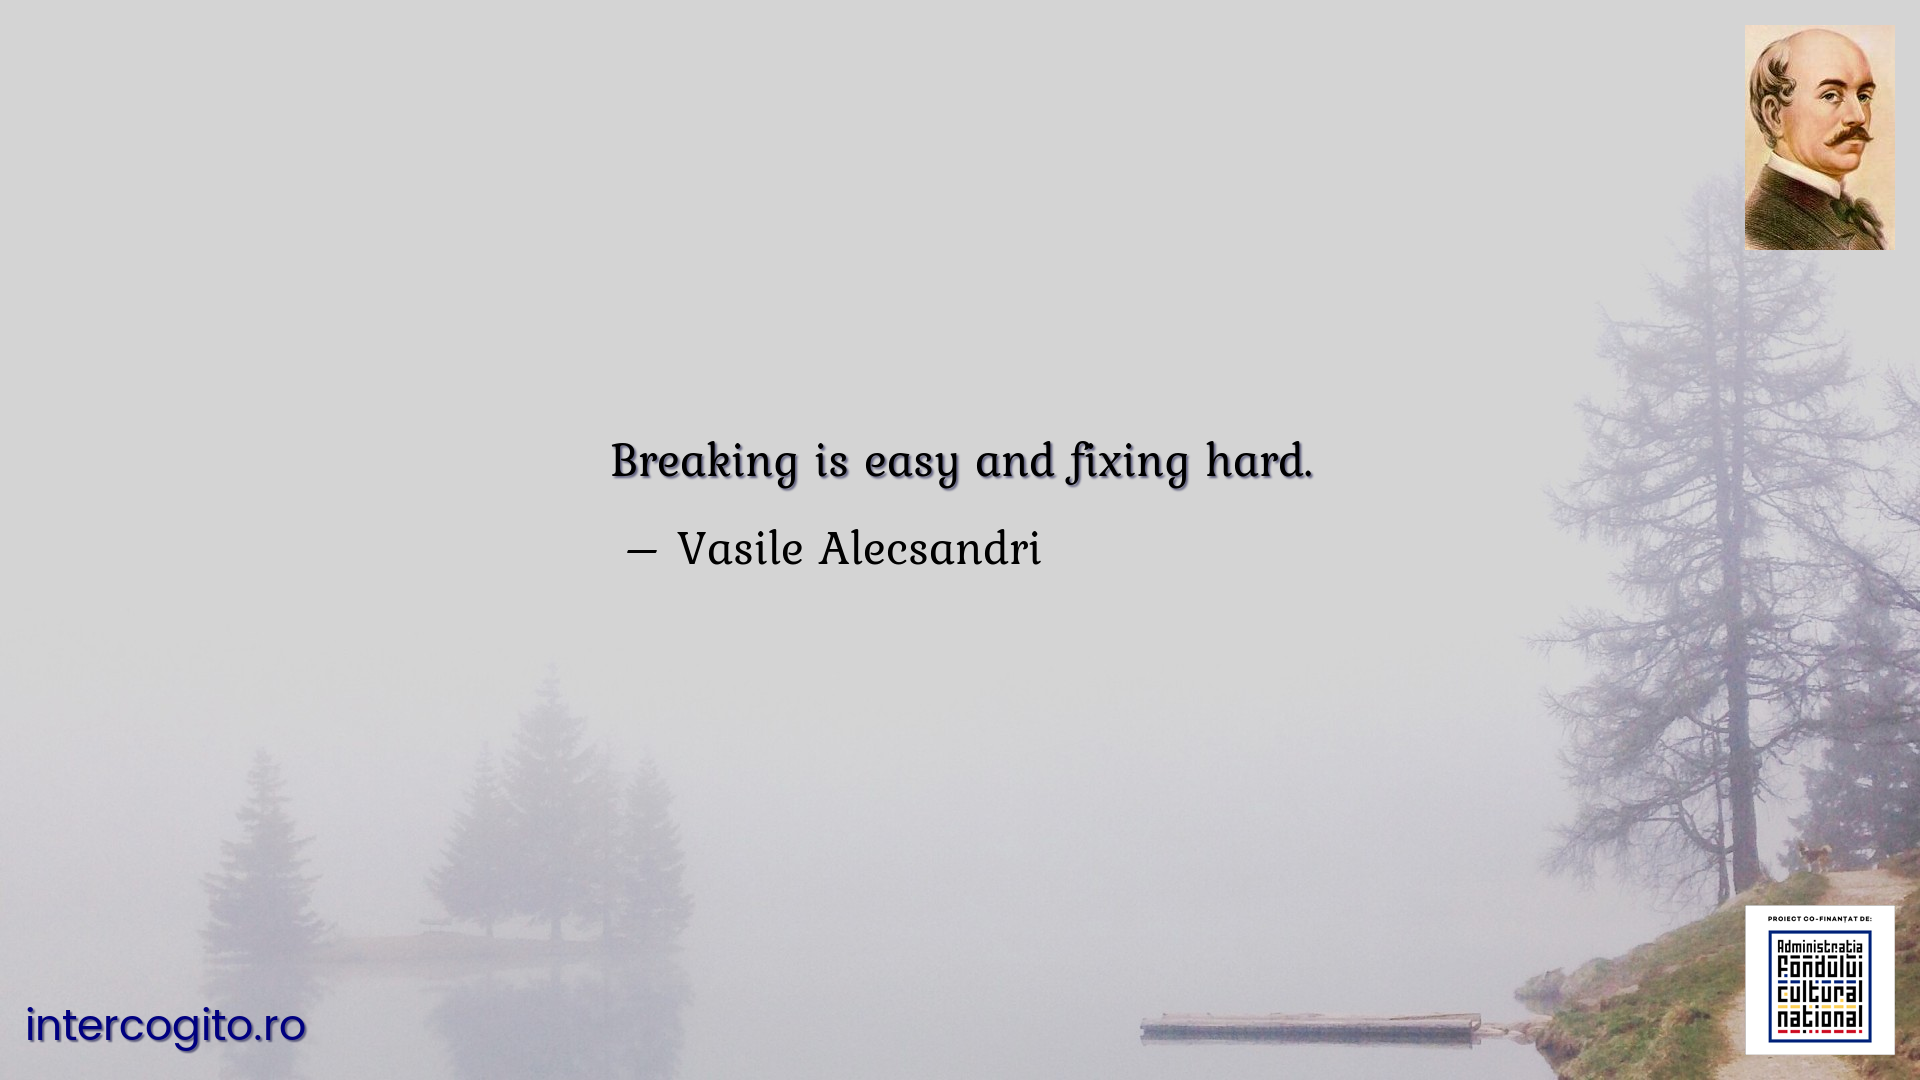 Breaking is easy and fixing hard.